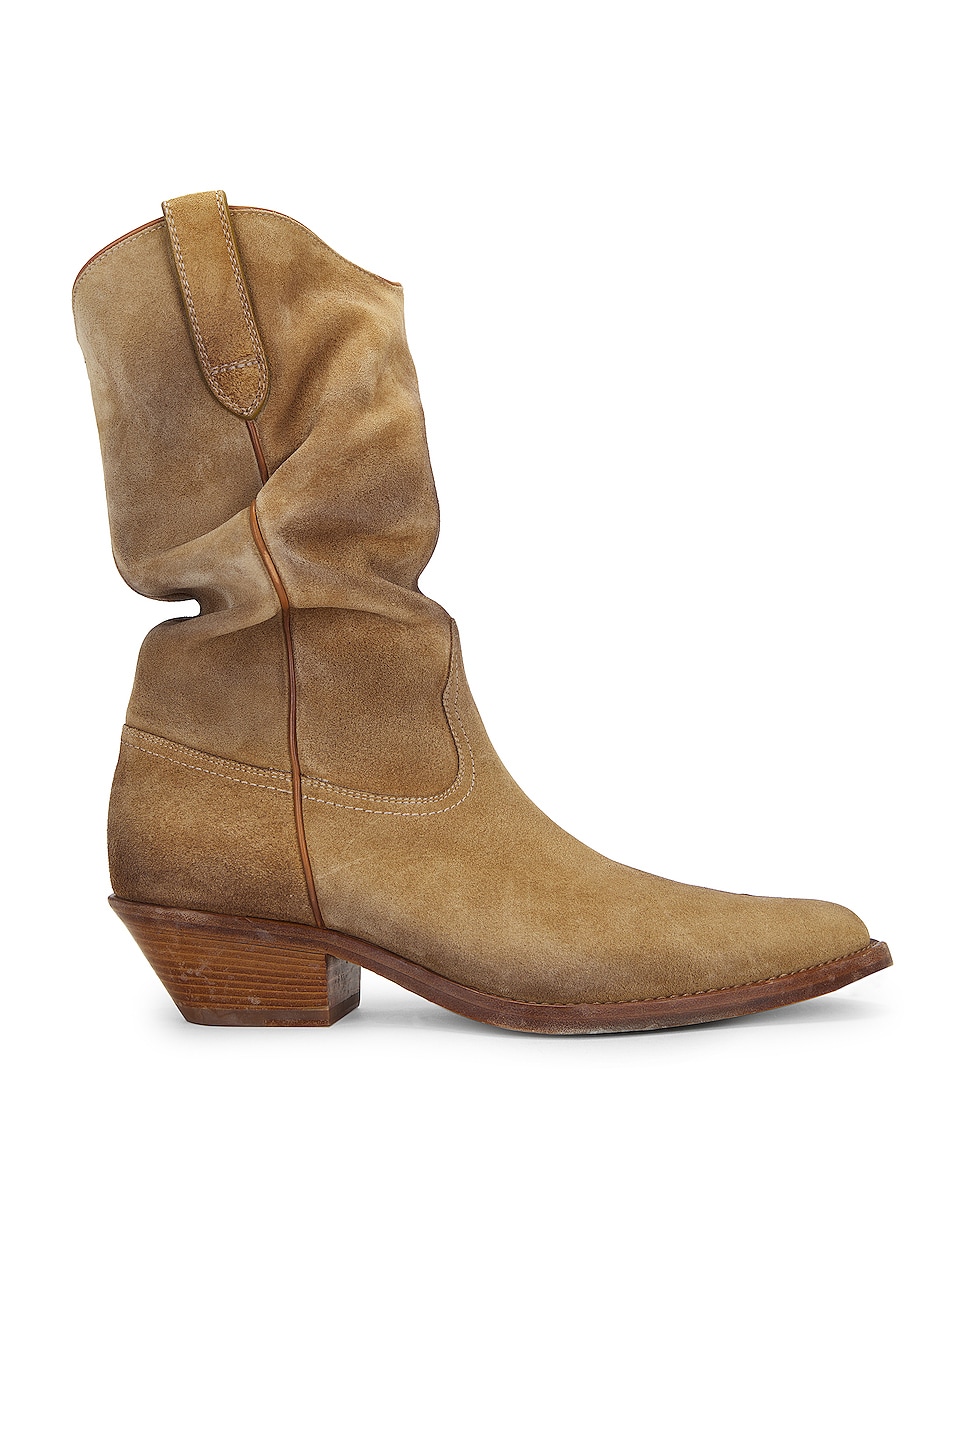 Image 1 of Maison Margiela Tabi Western Boots in Medal Bronze